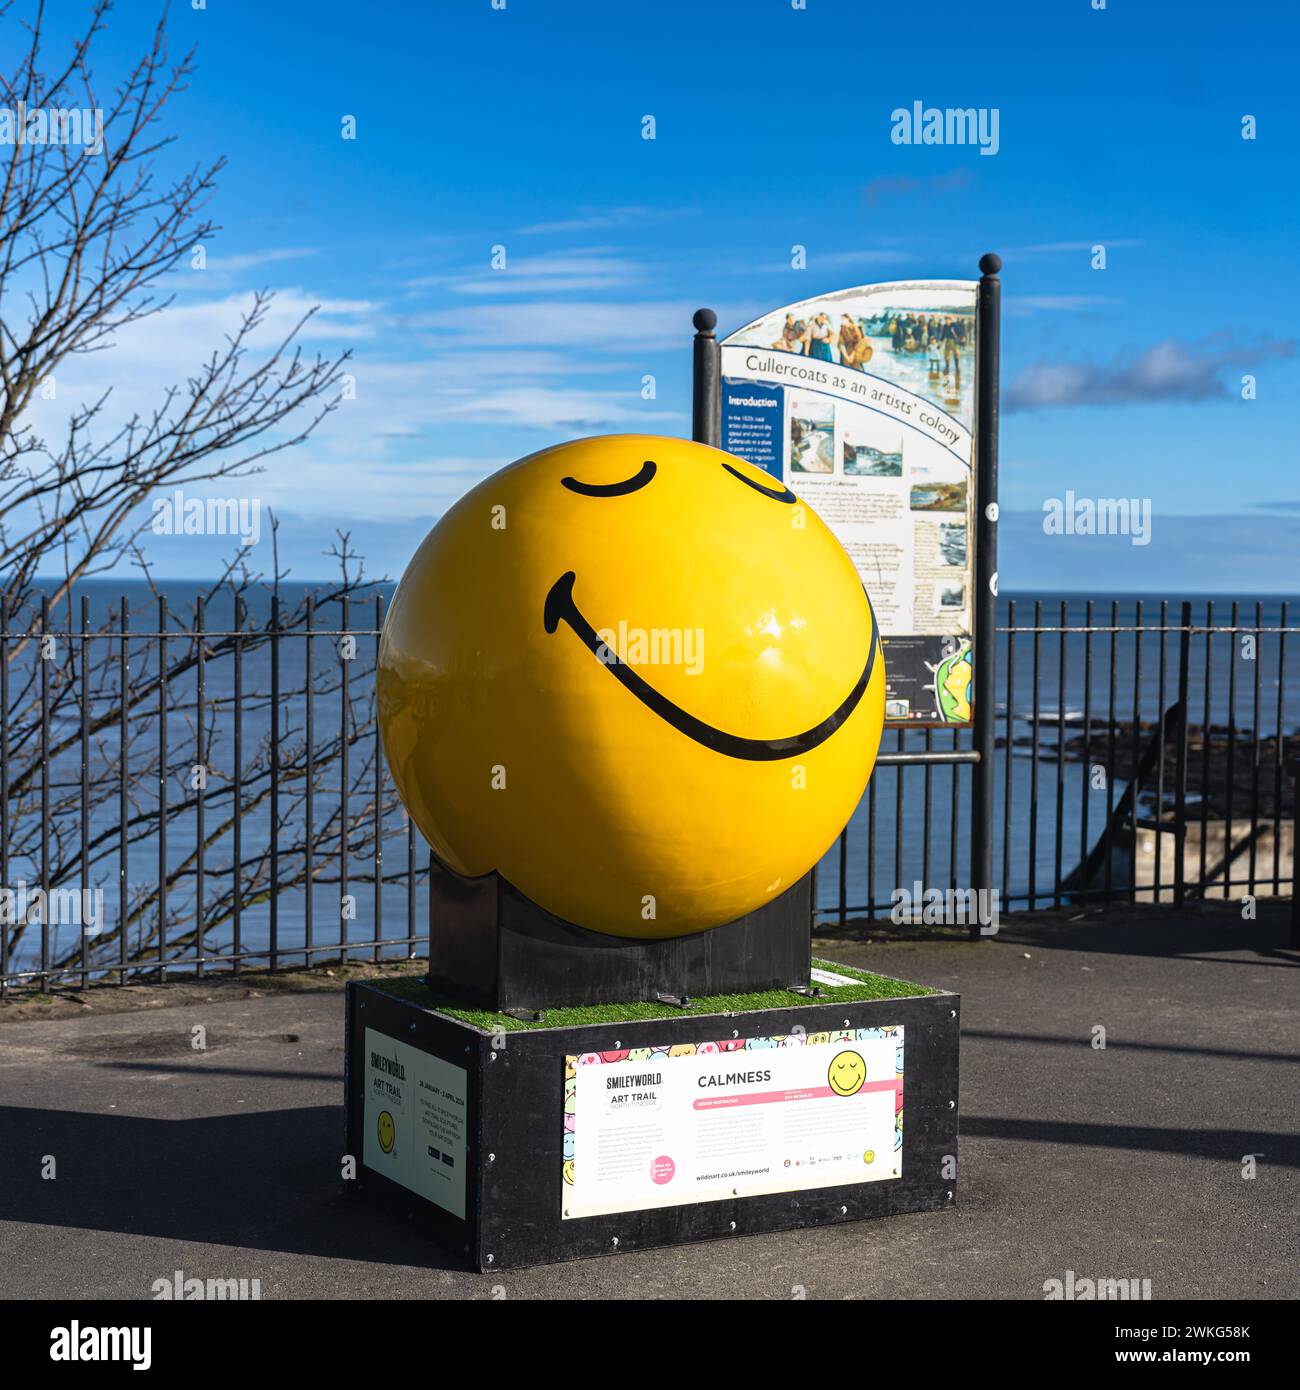 Yellow smiley face sculpture on a plinth, in Cullercoats, North Tyneside Stock Photo